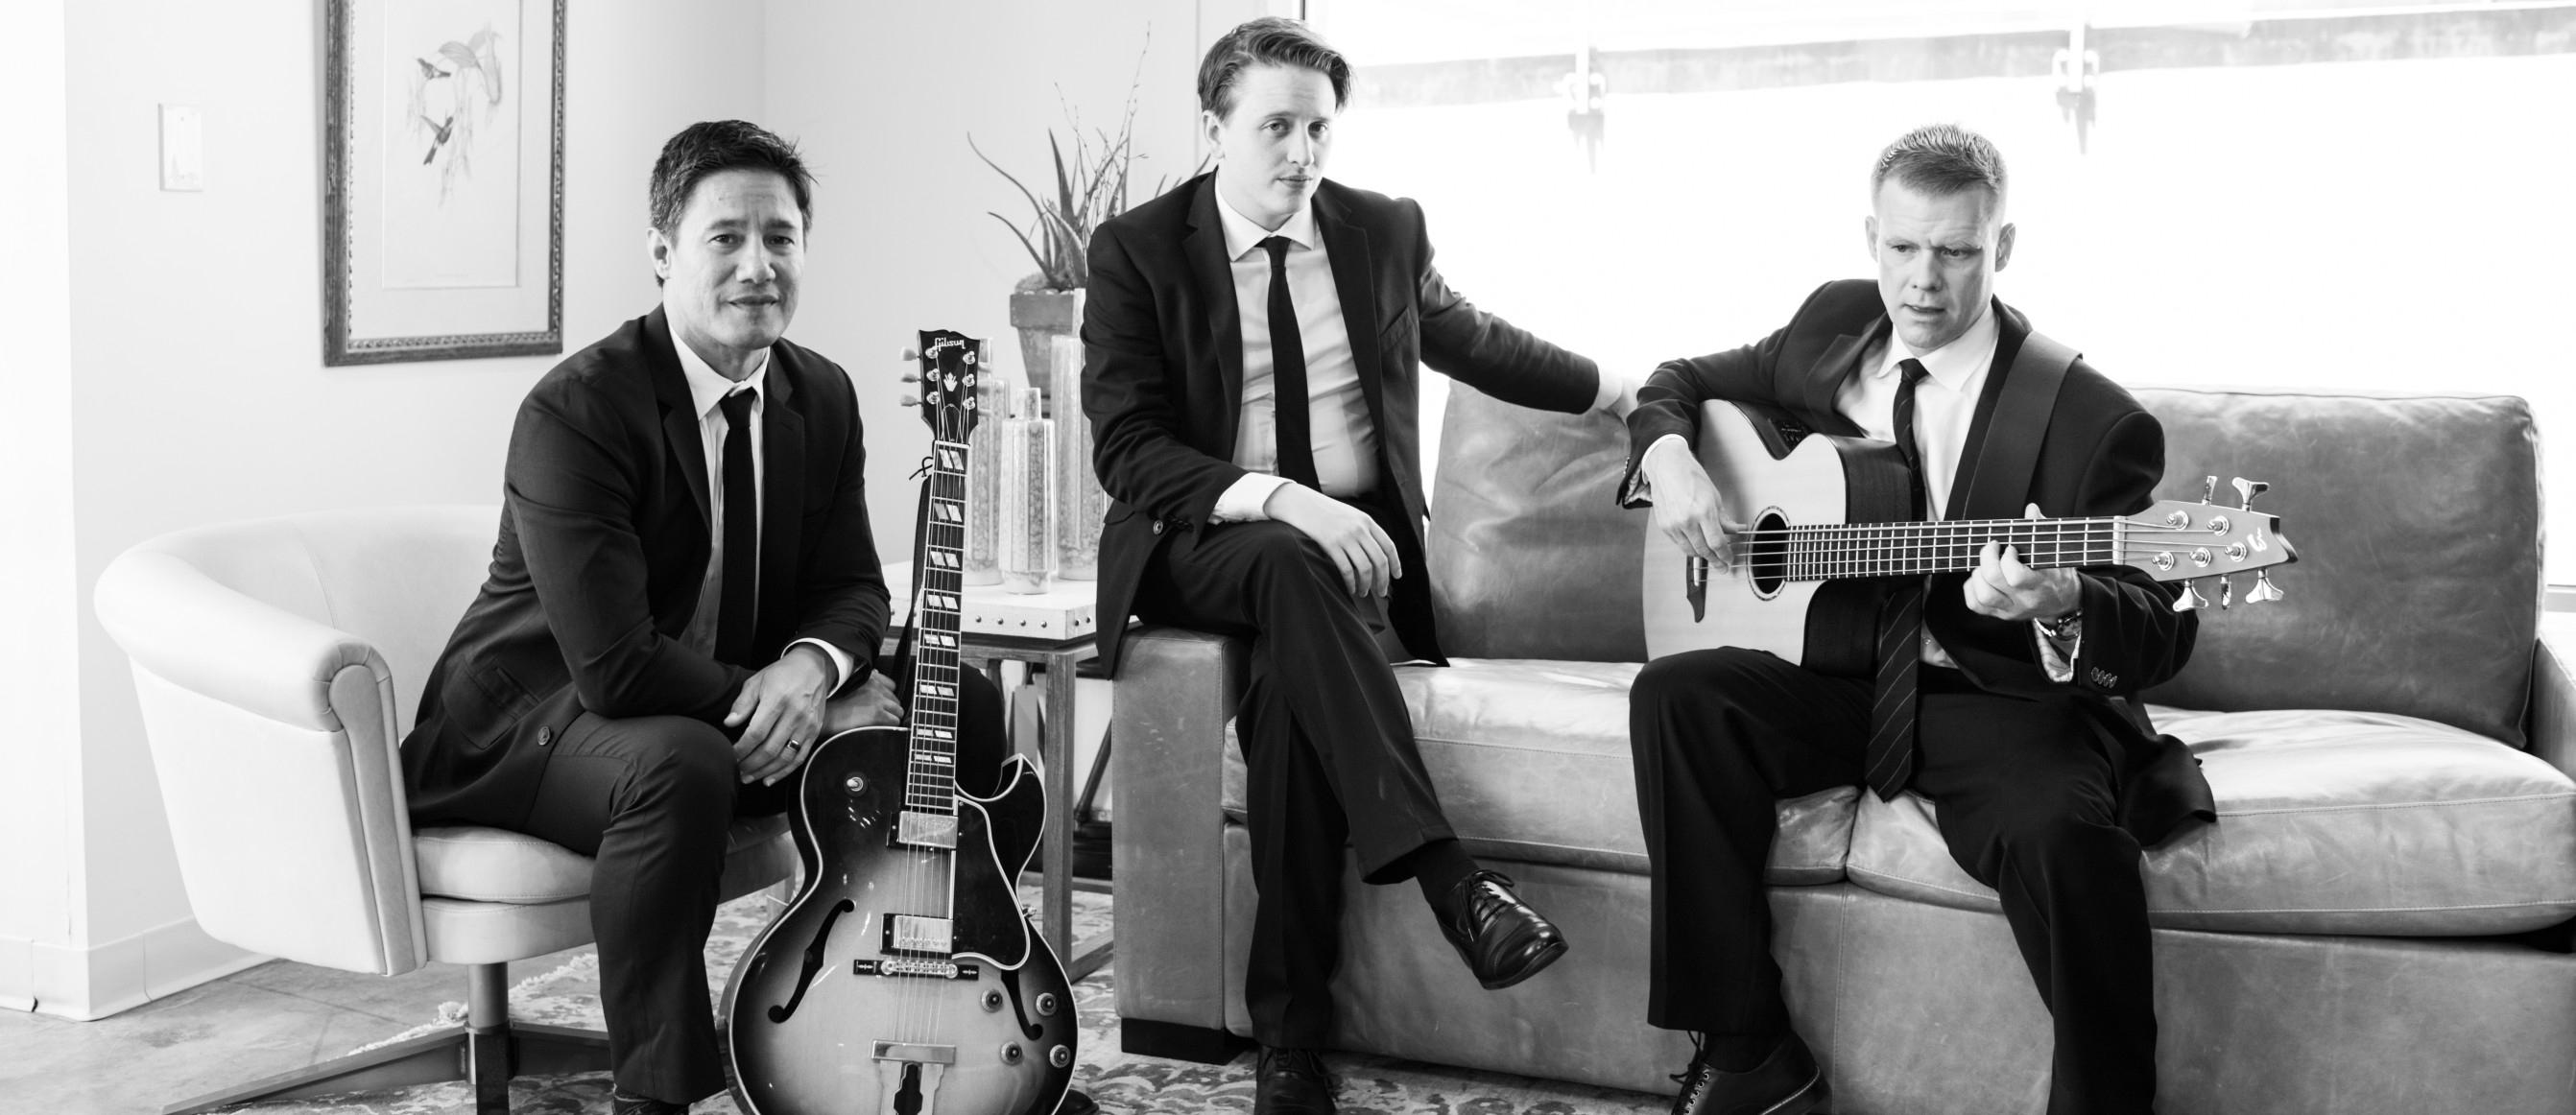 Atlanta Bands For Hire | Weddings & Events Bands - The Bourbon Brothers